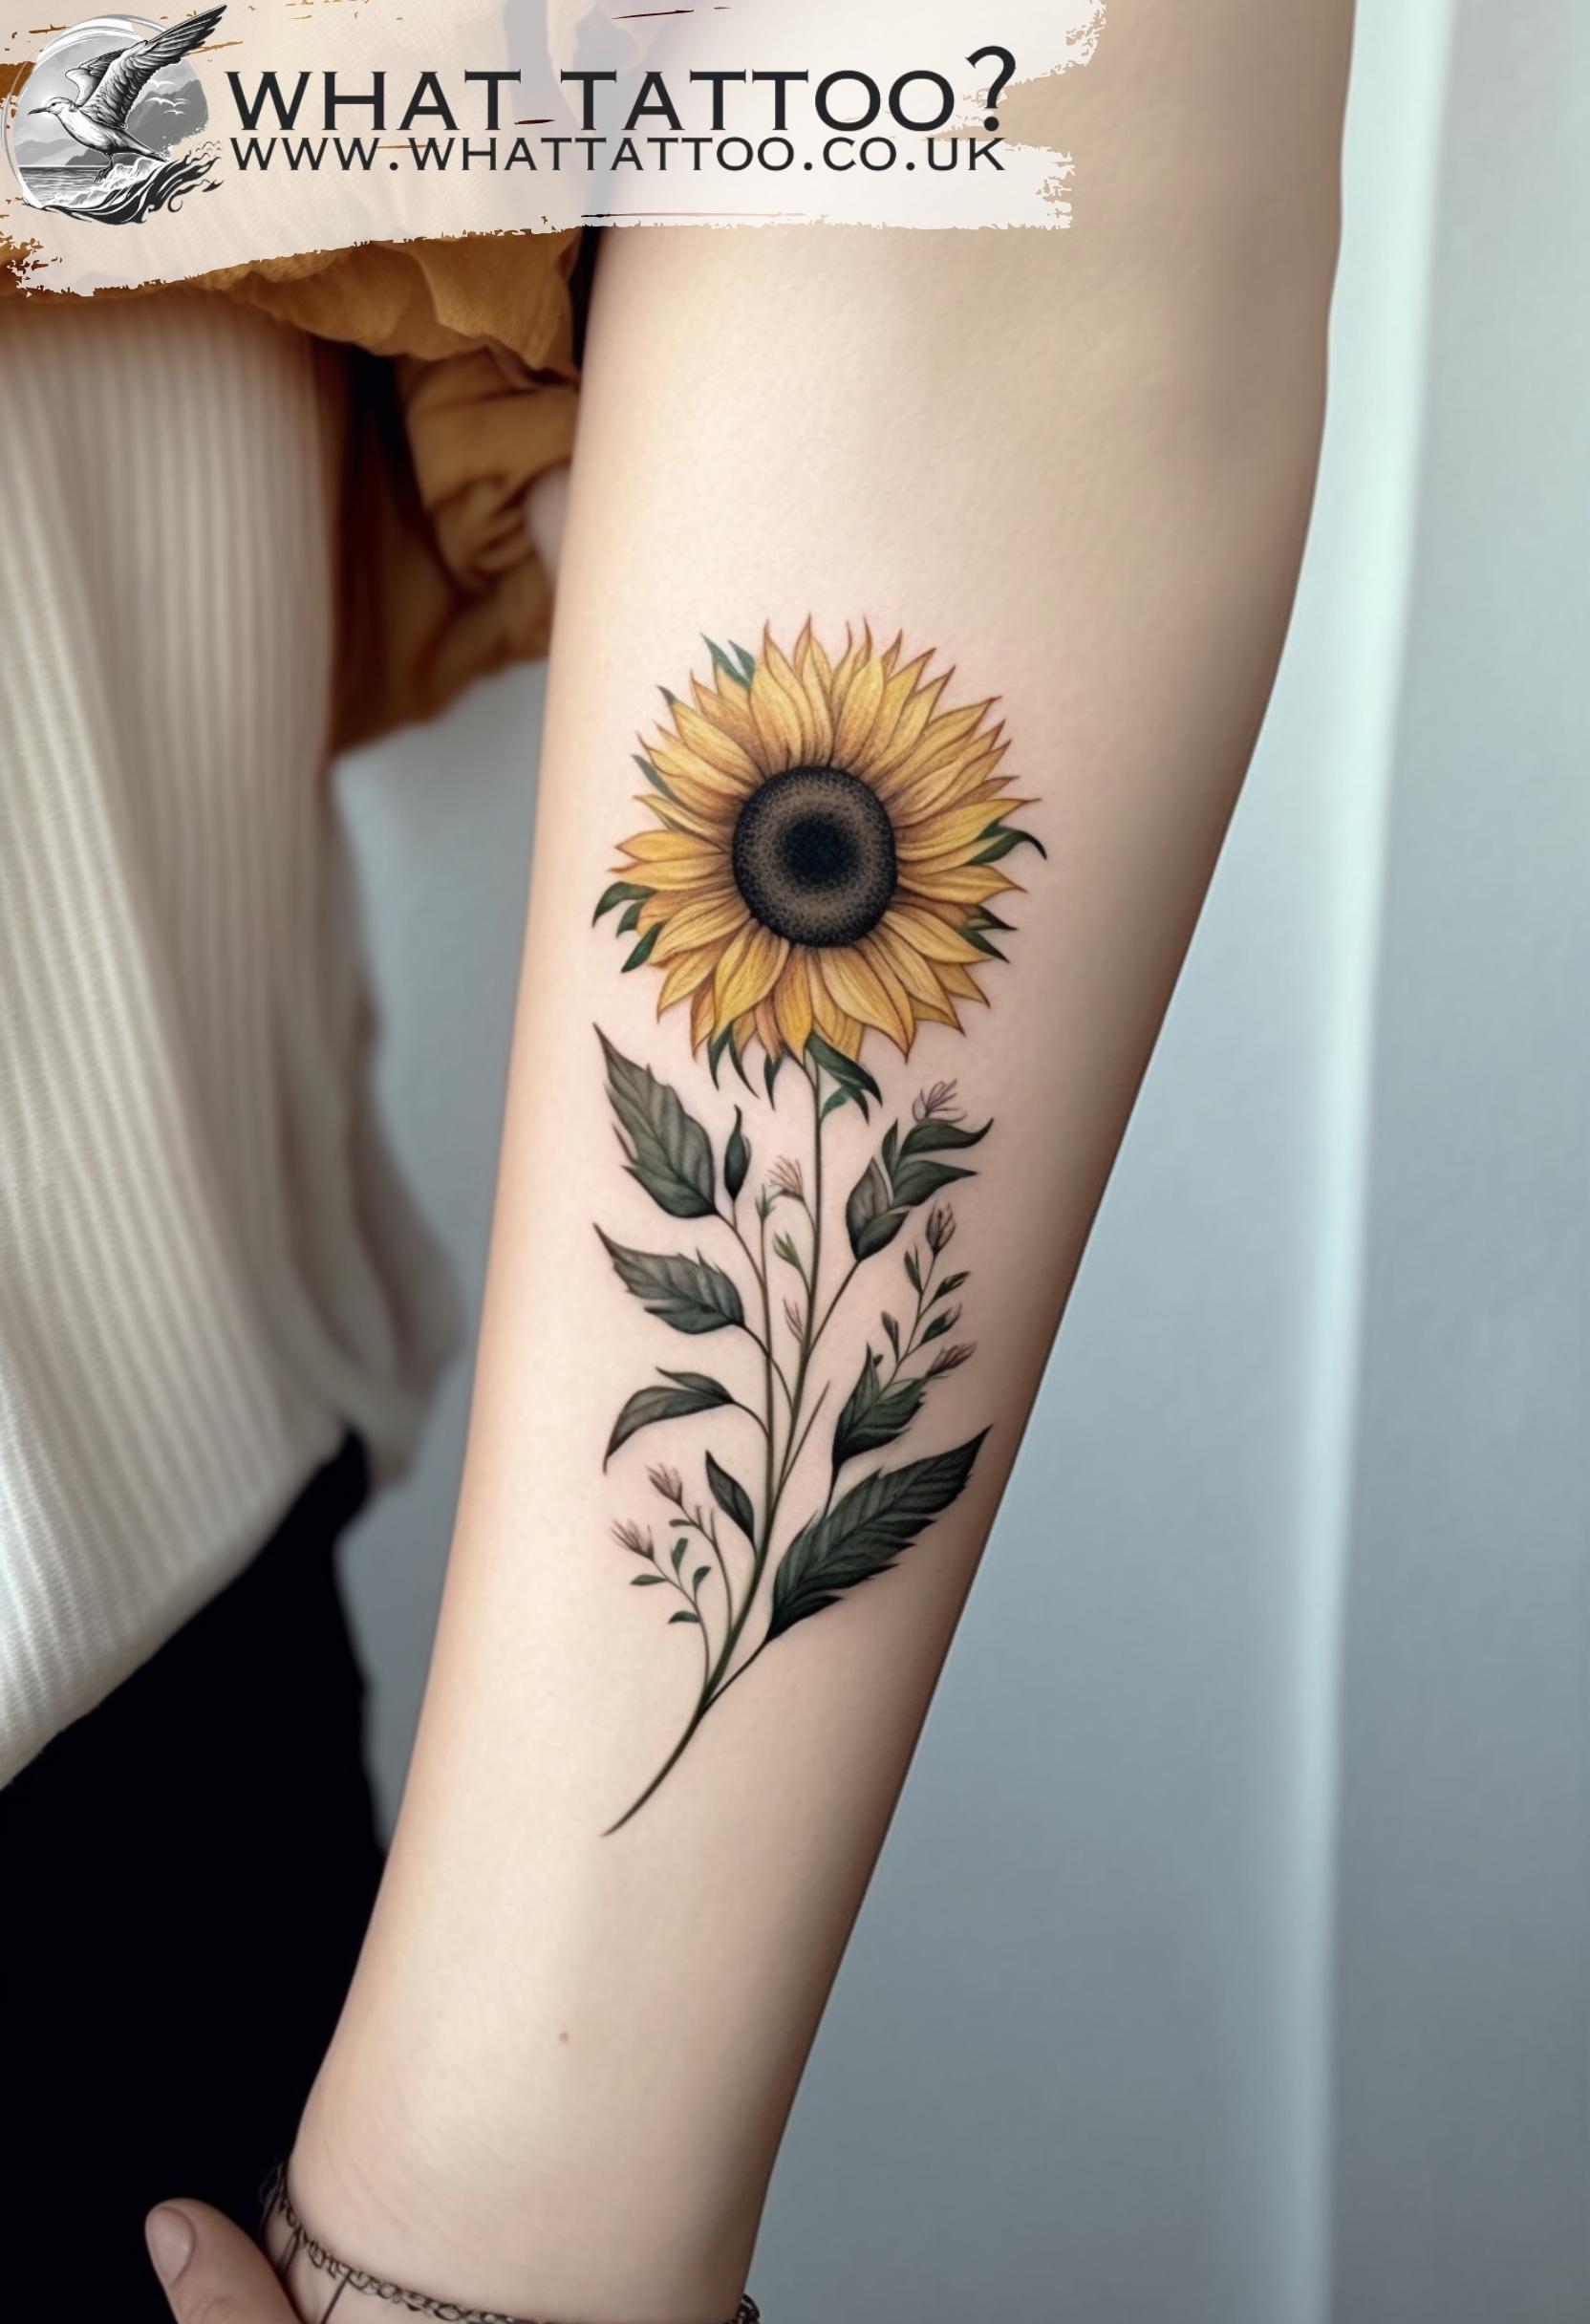 Sunflower Tattoo Meaning and Design Ideas - TatRing